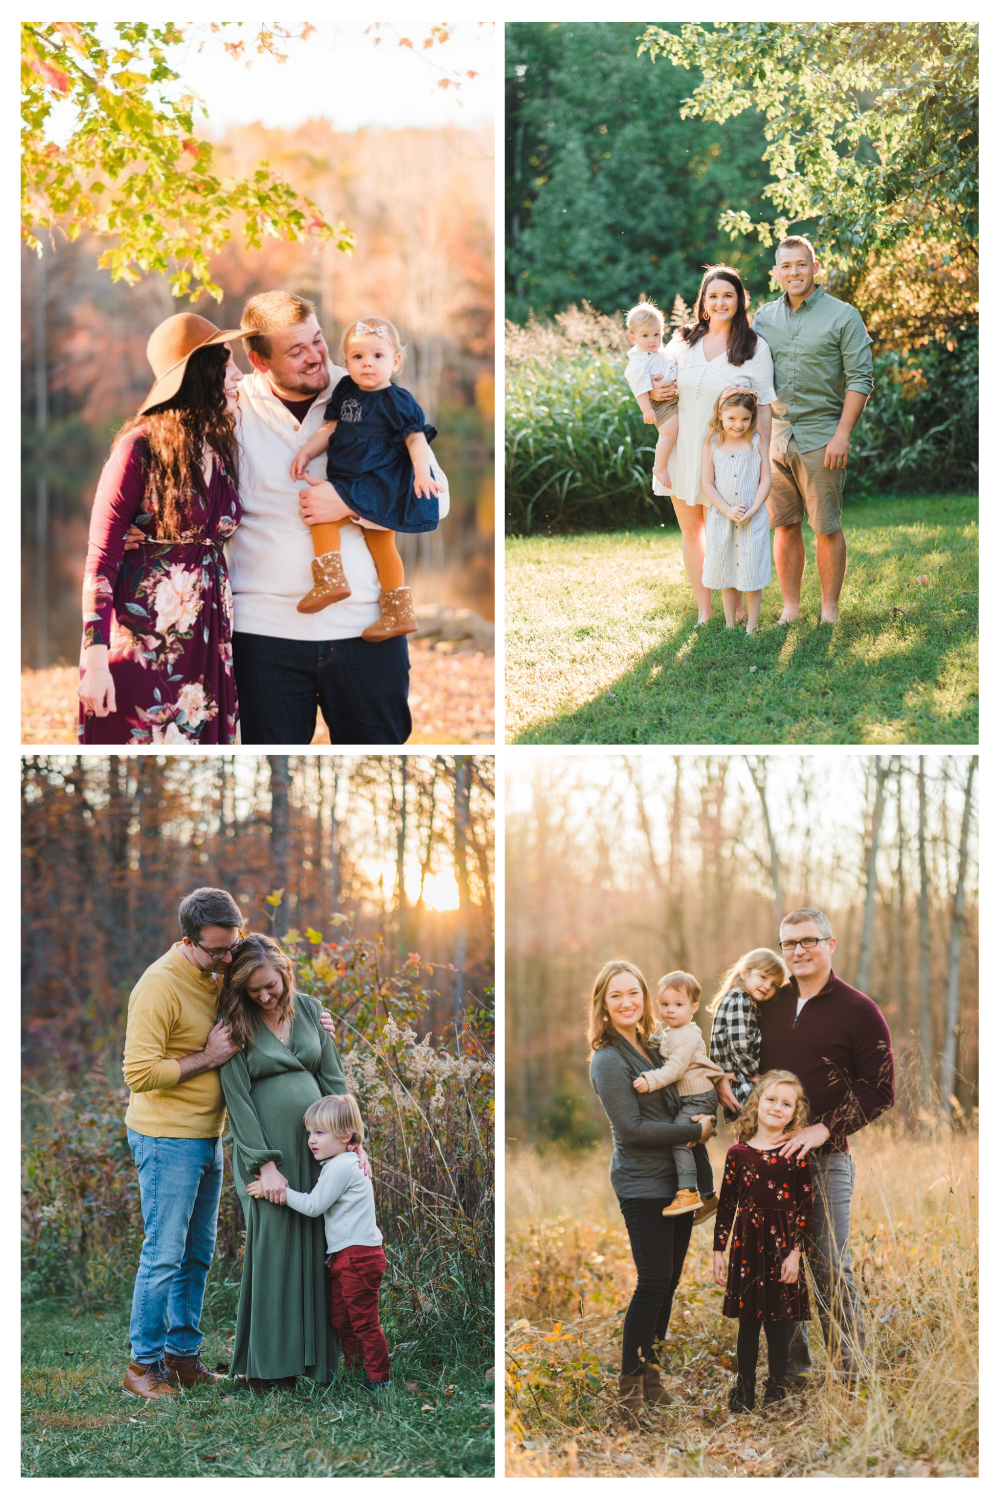 What to wear for Family Photos | Melissa Sheridan Photography